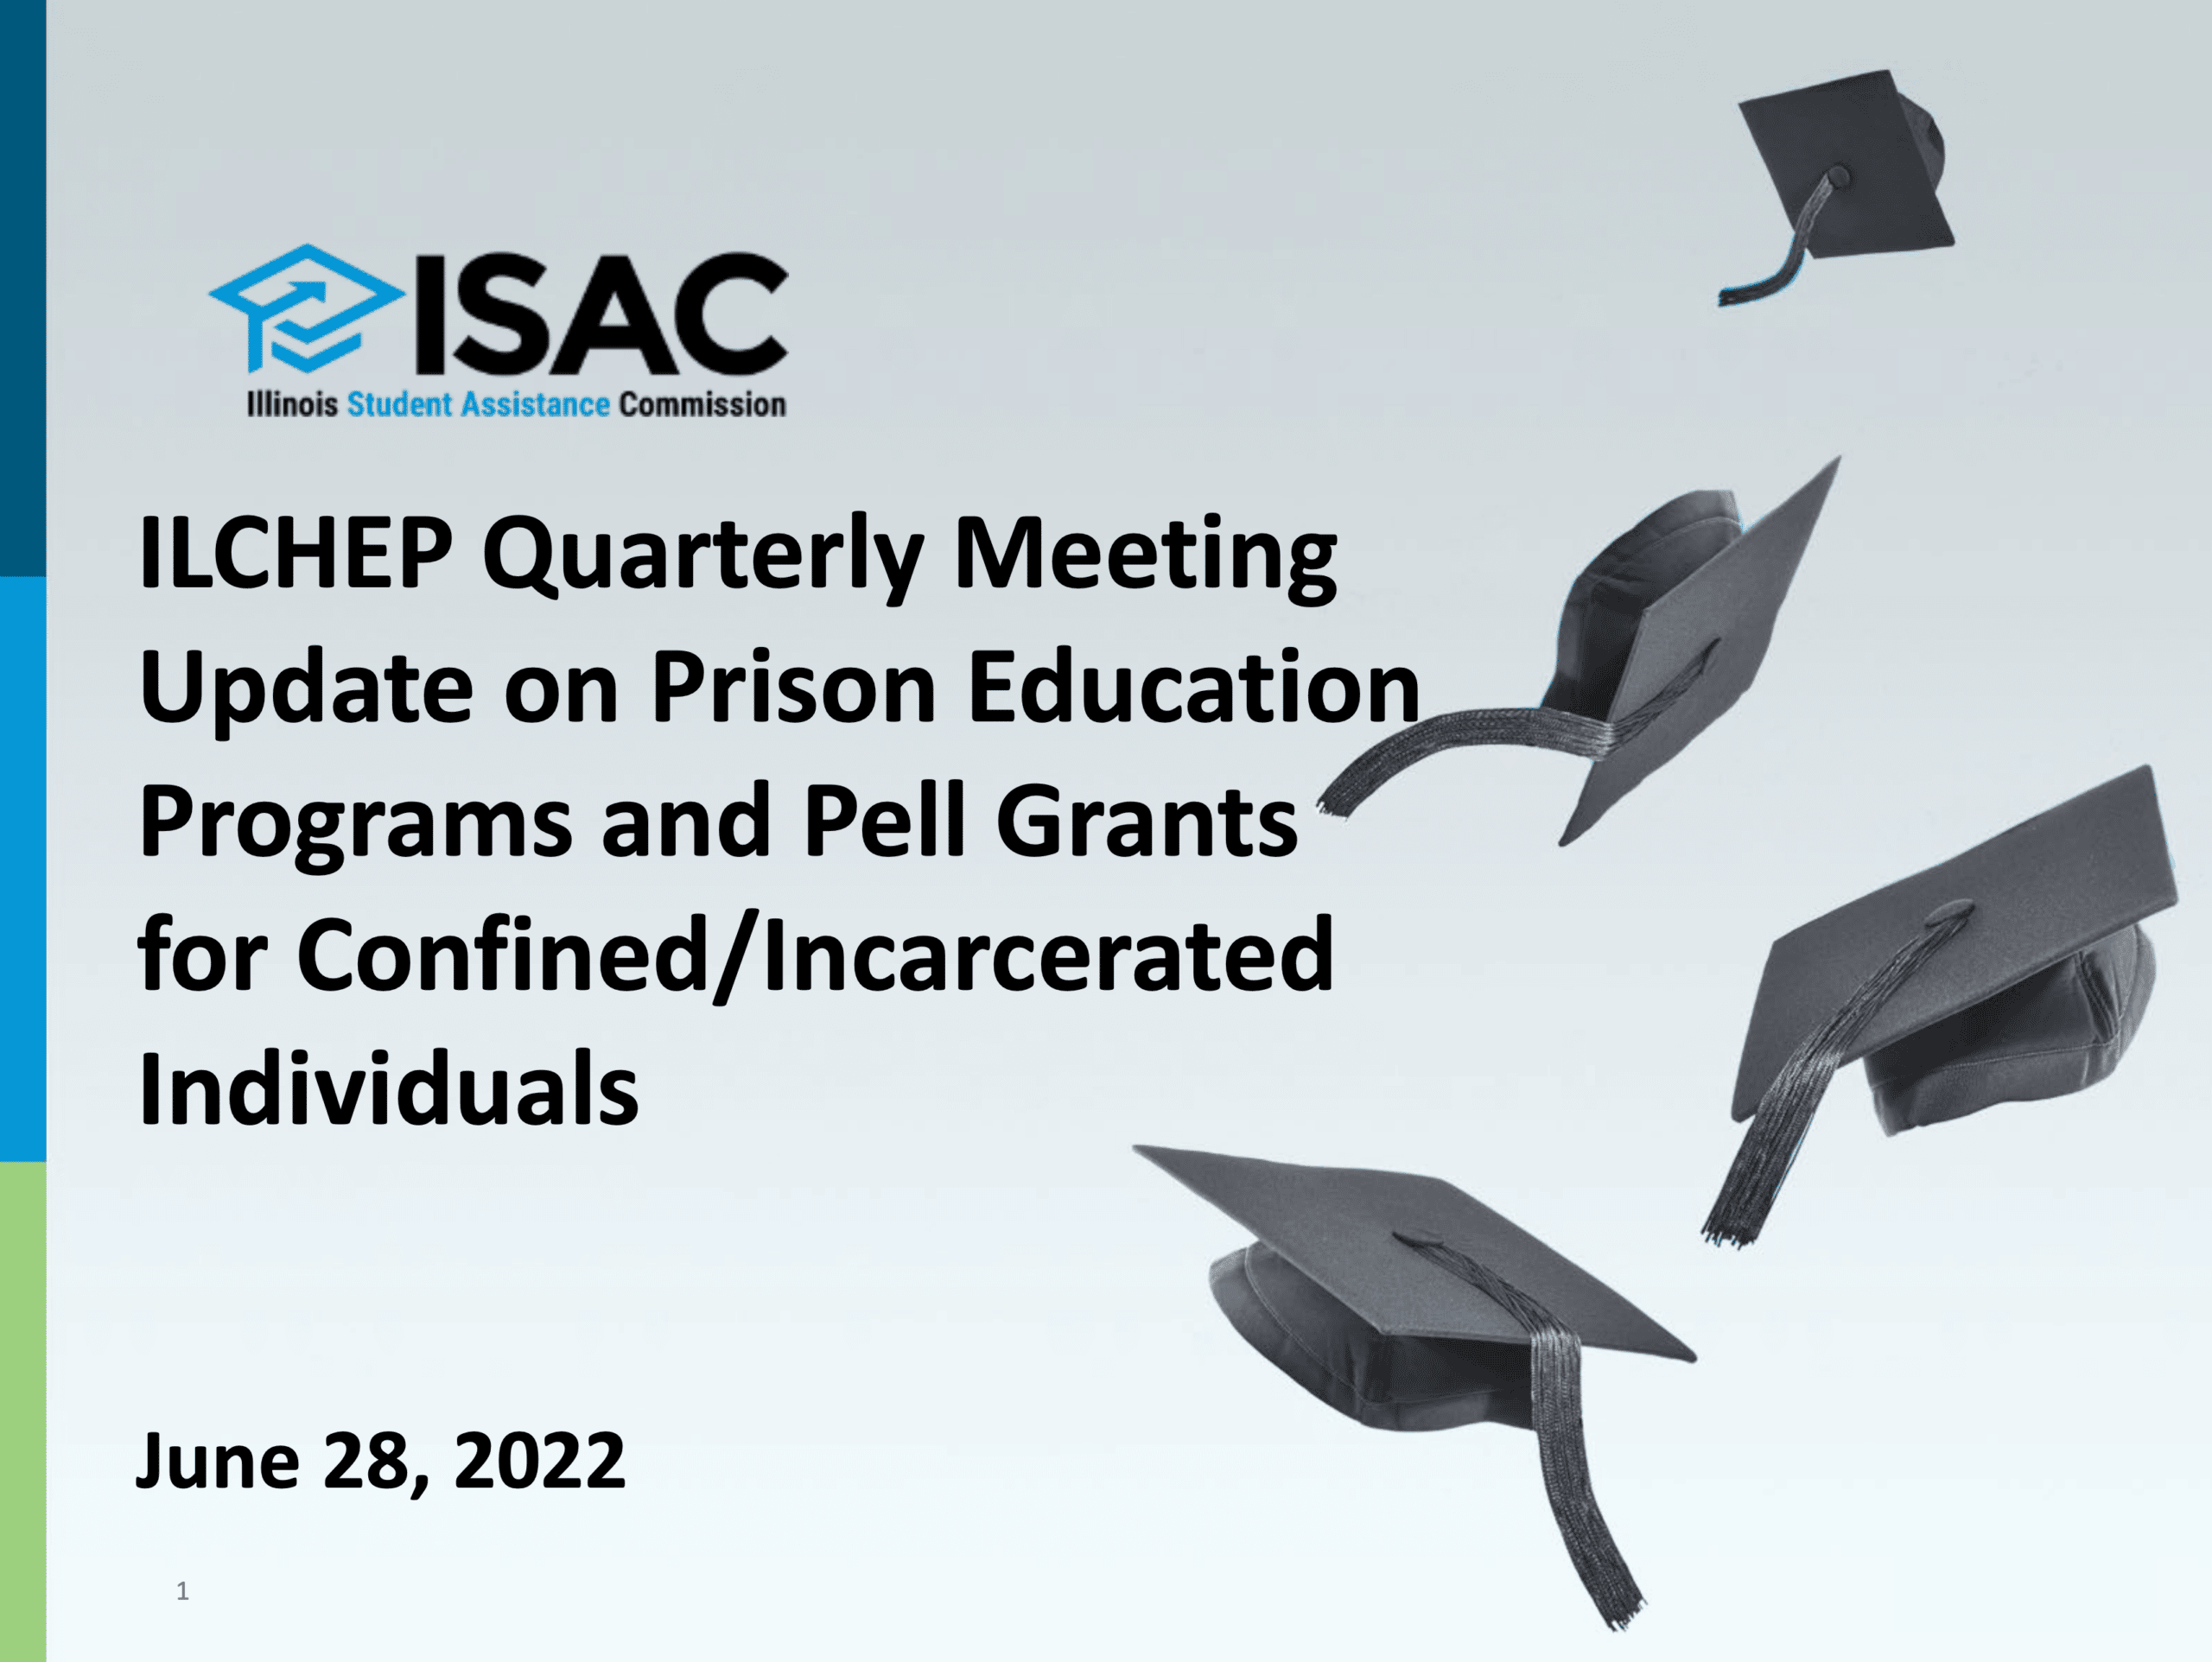 Update on Prison Education Programs and Pell Grants for Incarcerated Individuals